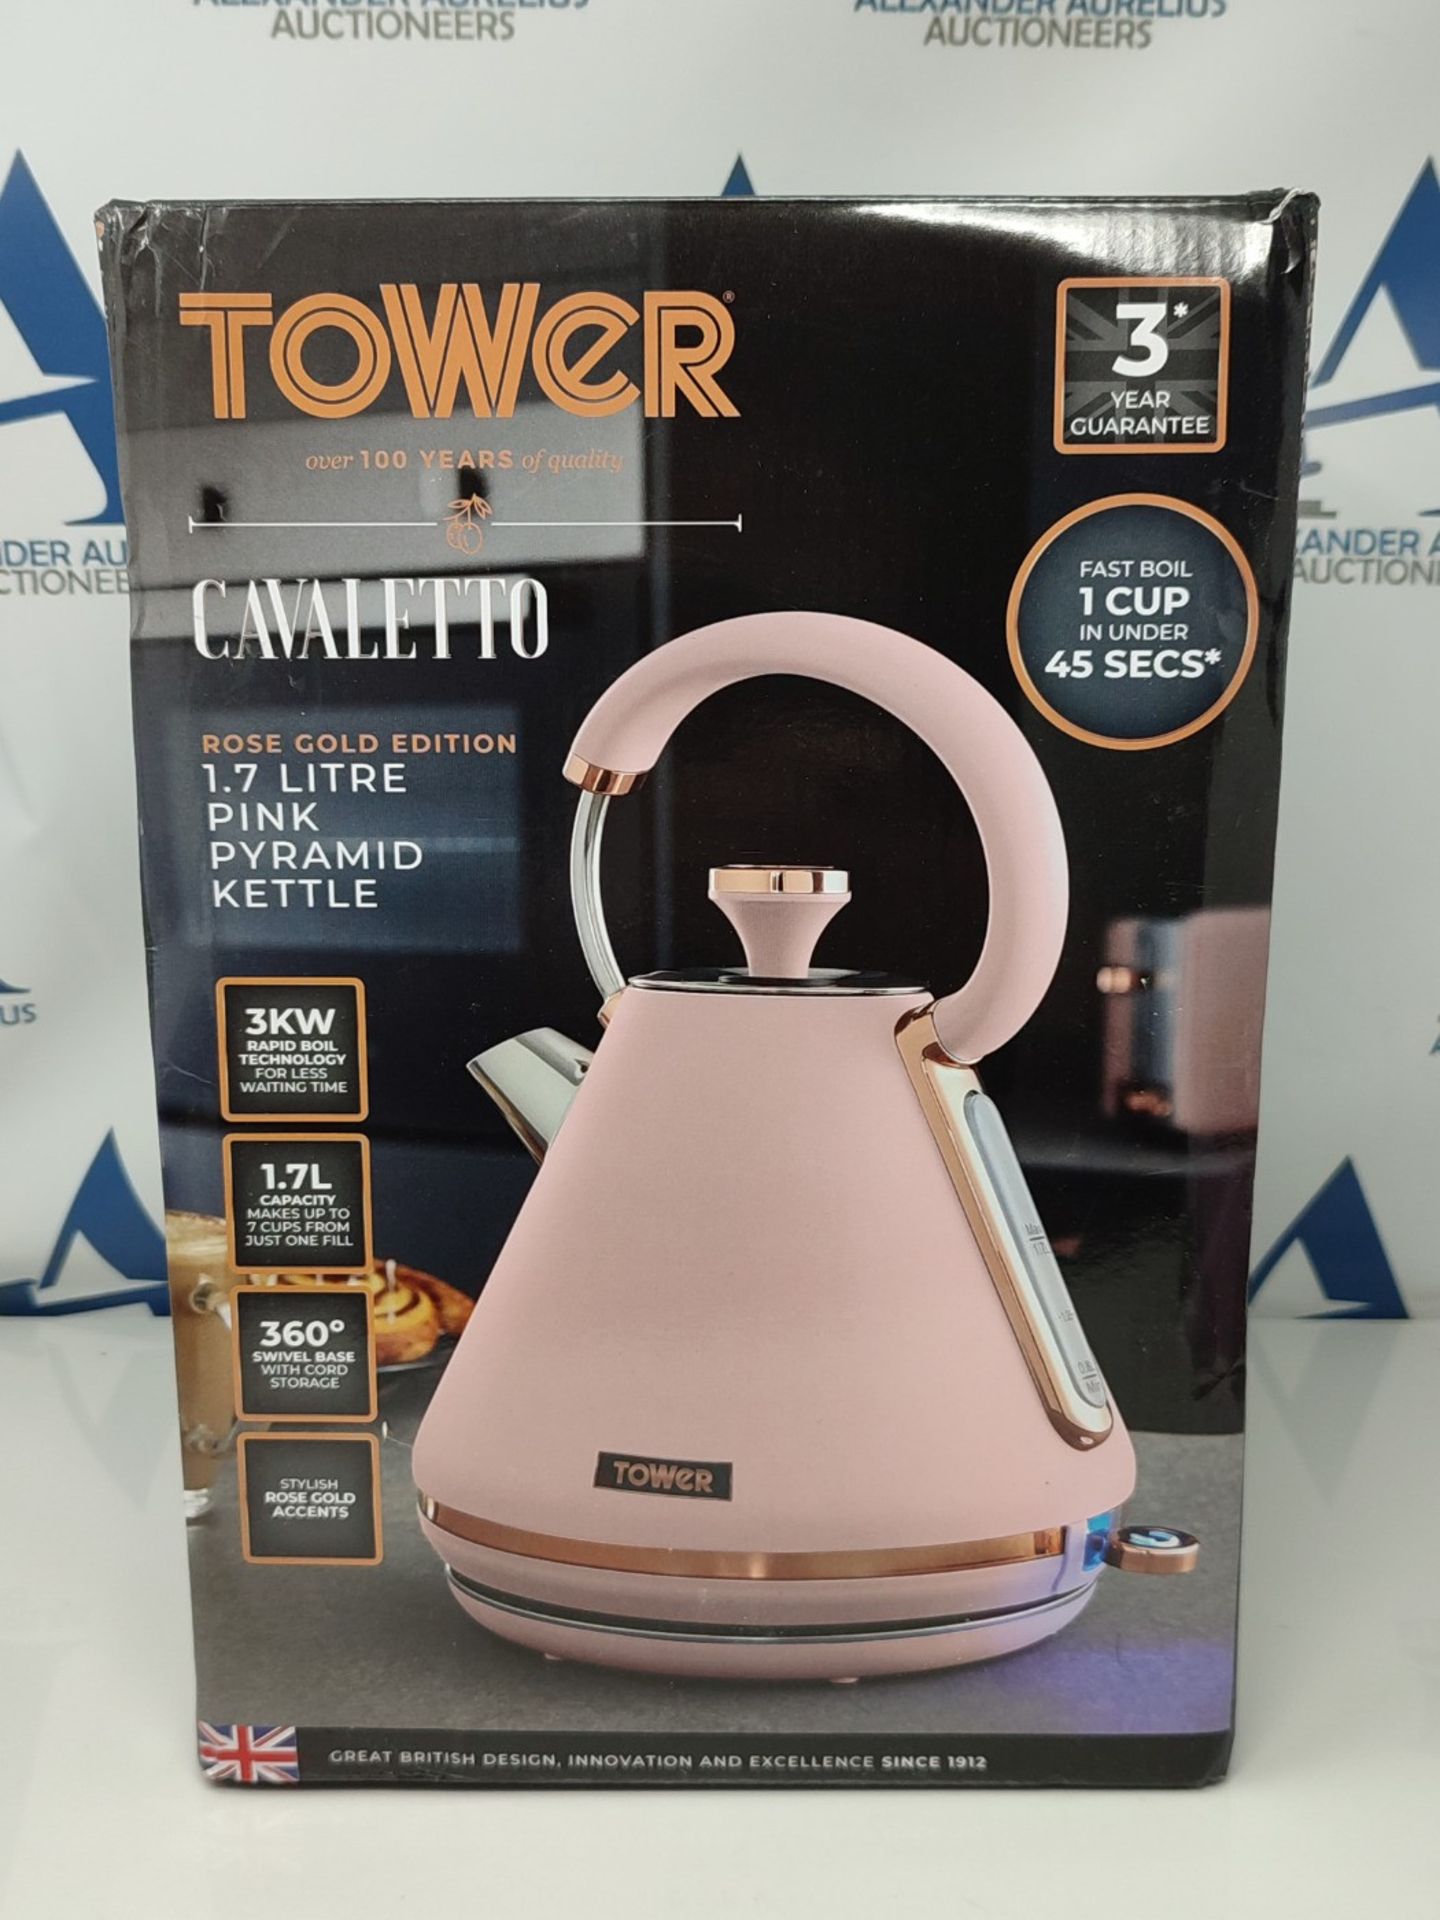 Tower T10044PNK Cavaletto Pyramid Kettle with Fast Boil, Detachable Filter, 1.7 Litre, - Image 2 of 3